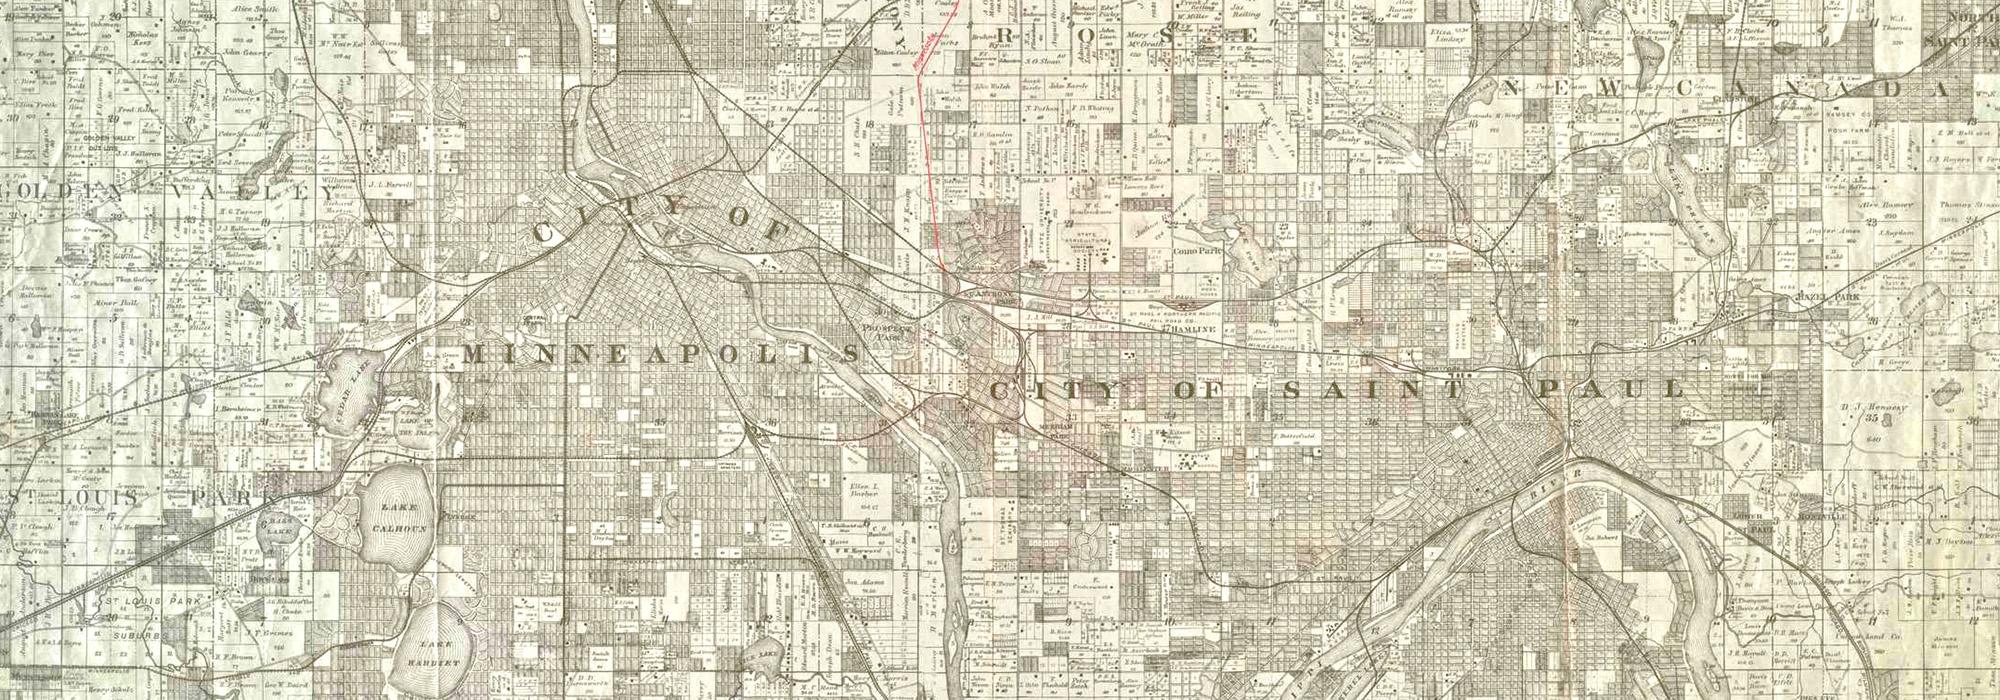 Historic map of St. Paul and Minneapolis, MN